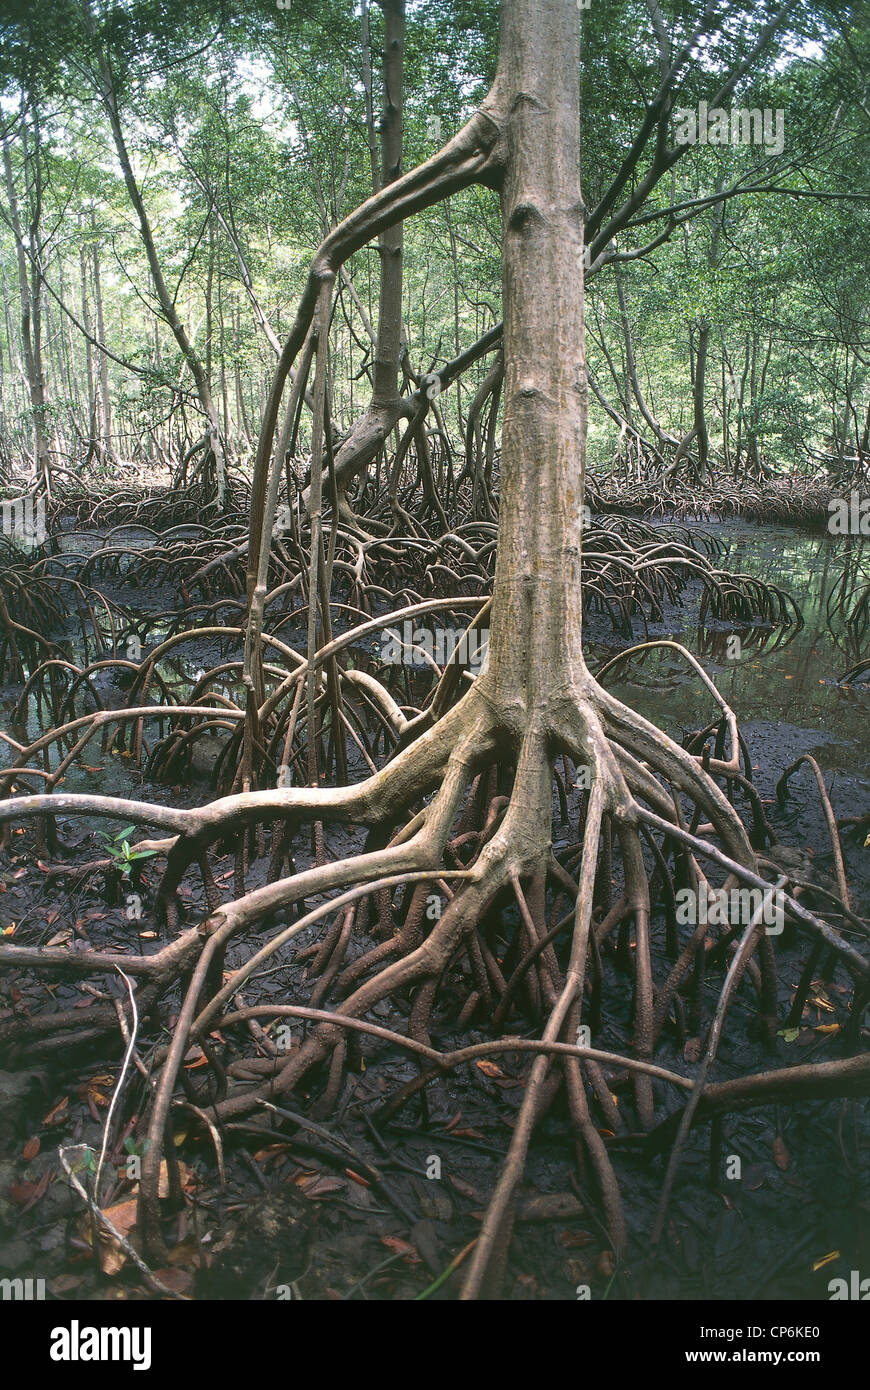 Dominican Republic - National Park of Los Haitises, roots and trunks of mangroves Stock Photo